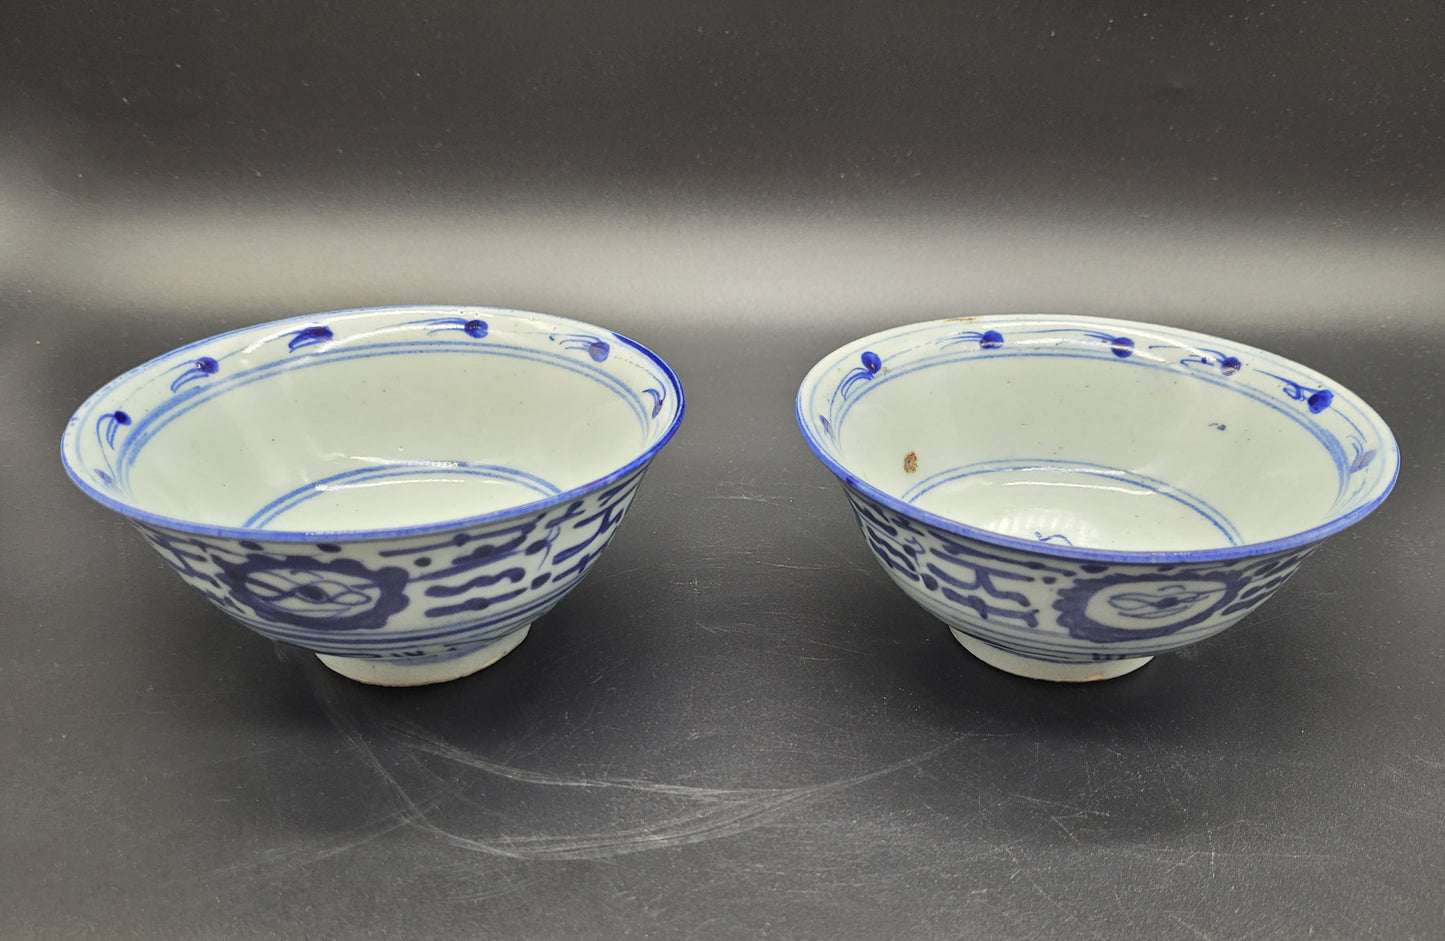 ANTIQUES & COLLECTABLES USA Two Chinese Qing Porcelain Bowls 18th Century Blue / White